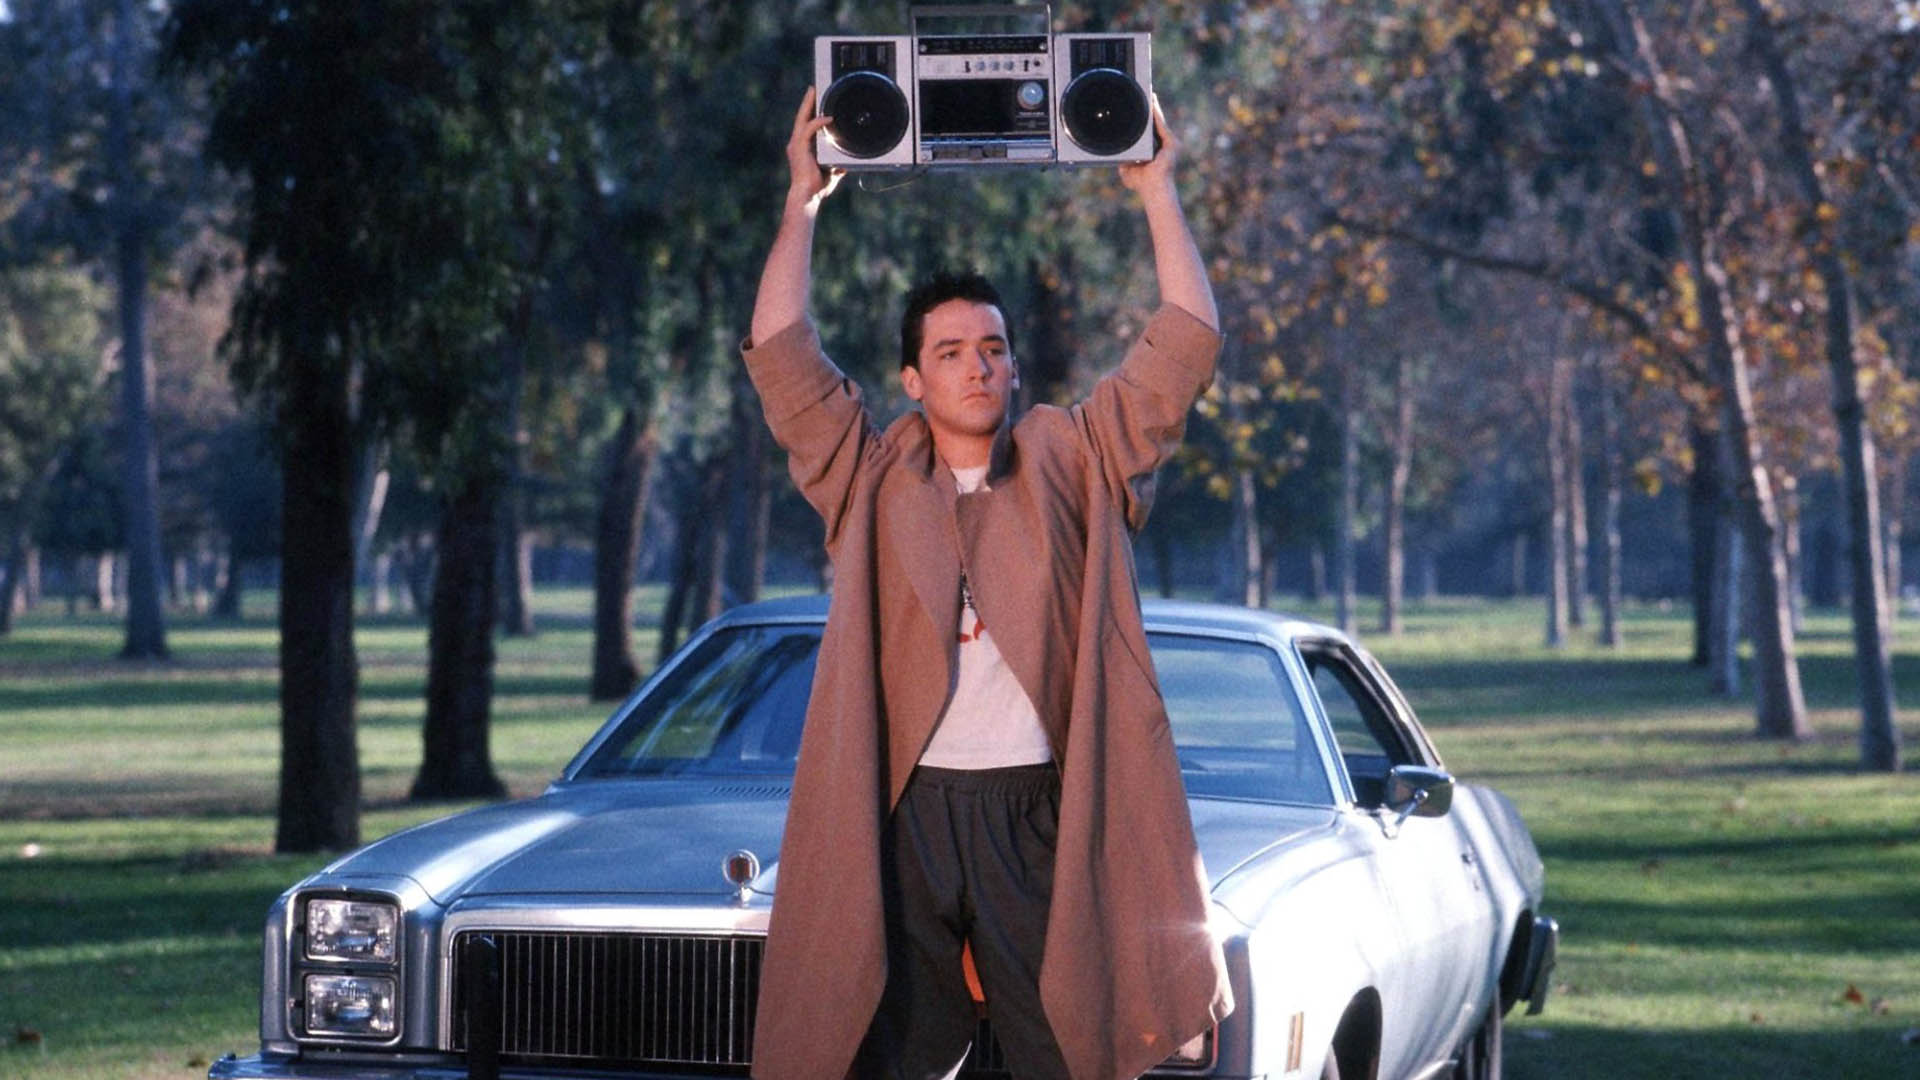 John Kiosk holding a tape recorder in Say Anything